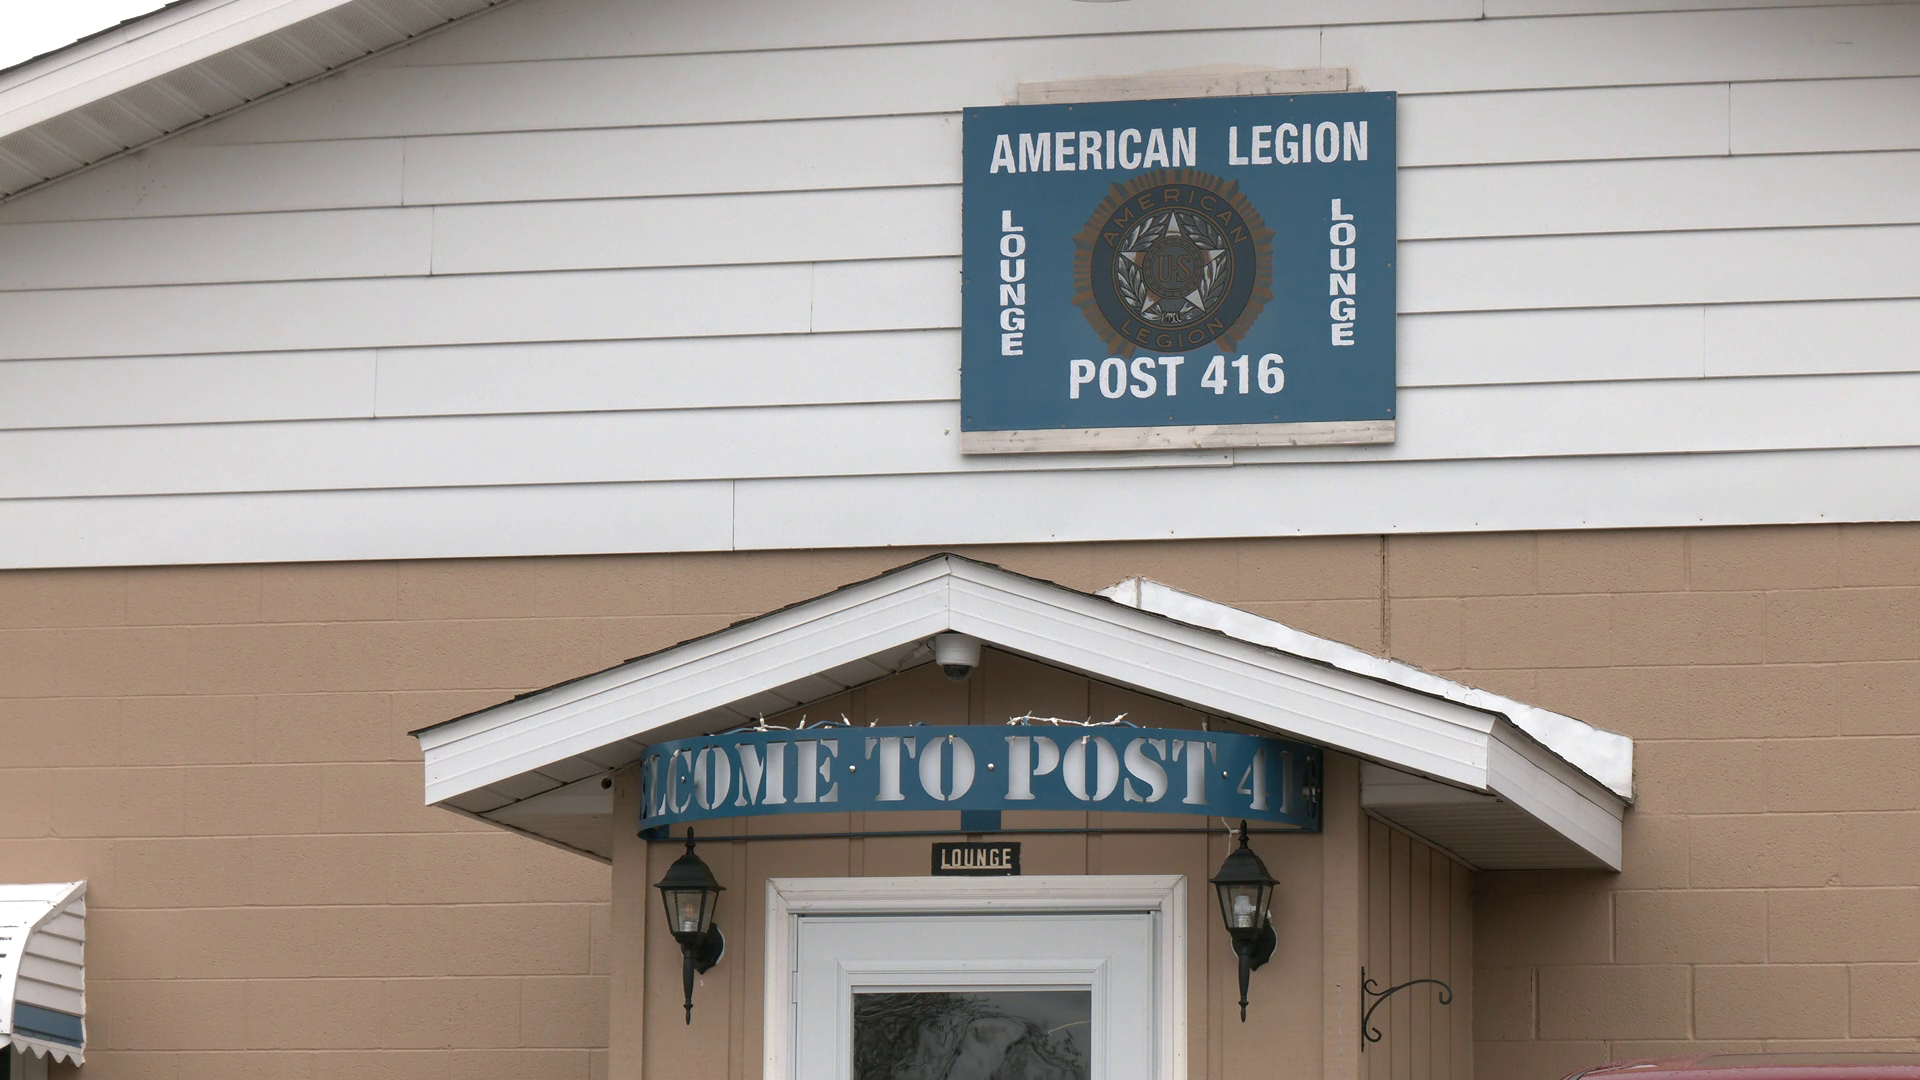 Generous donation helps Roscommon Co. American Legion post get a major upgrade